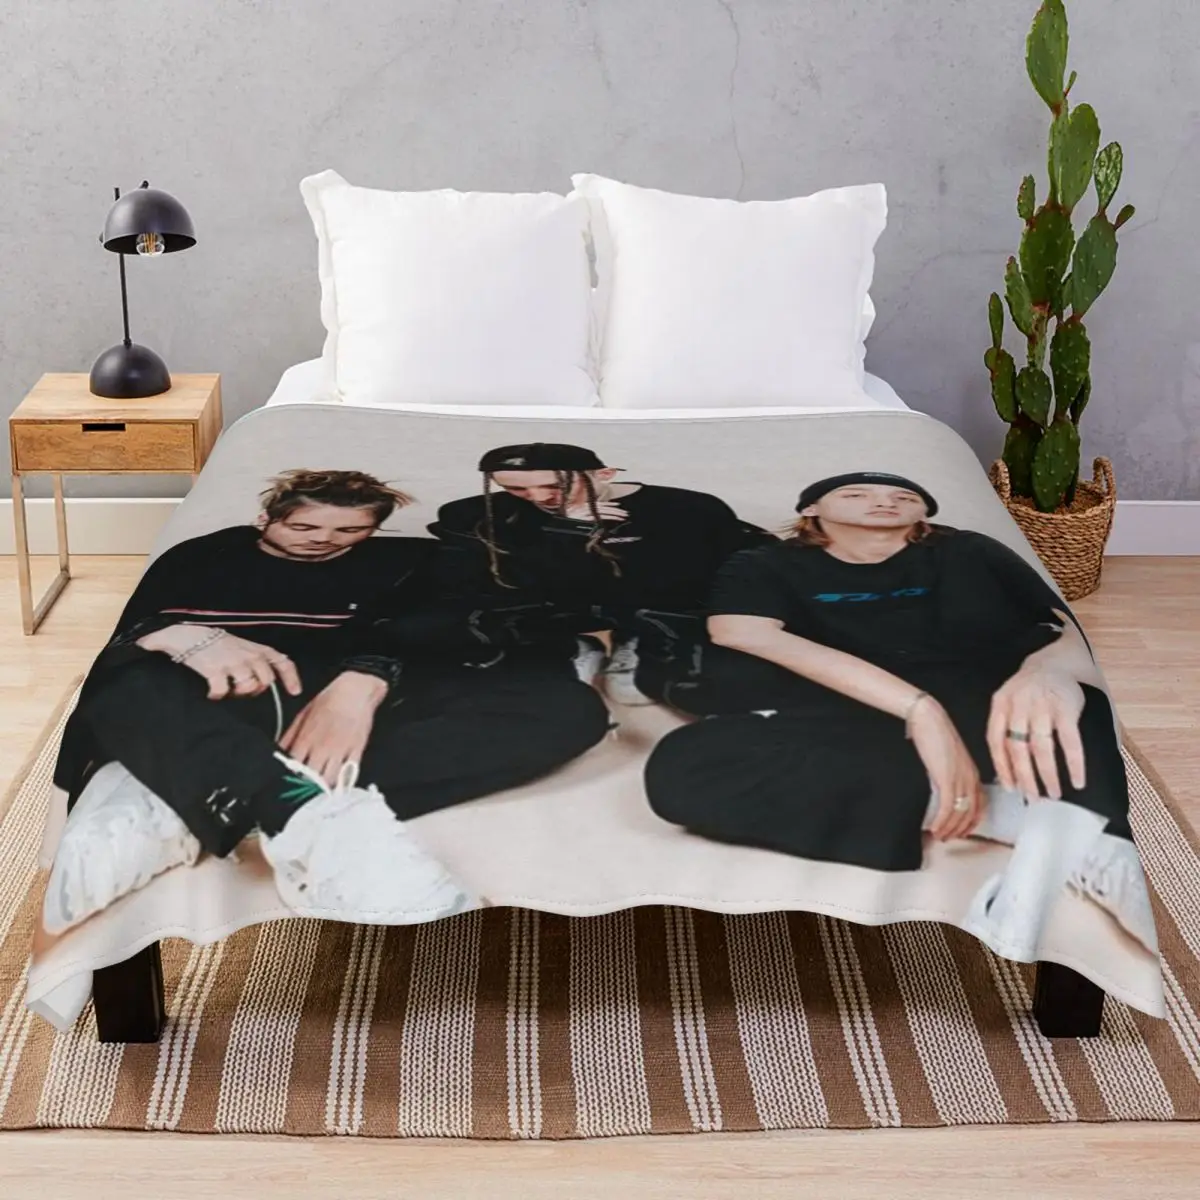 Chase Atlantic Blanket Fleece Plush Print Multifunction Throw Blankets for Bedding Home Couch Camp Office